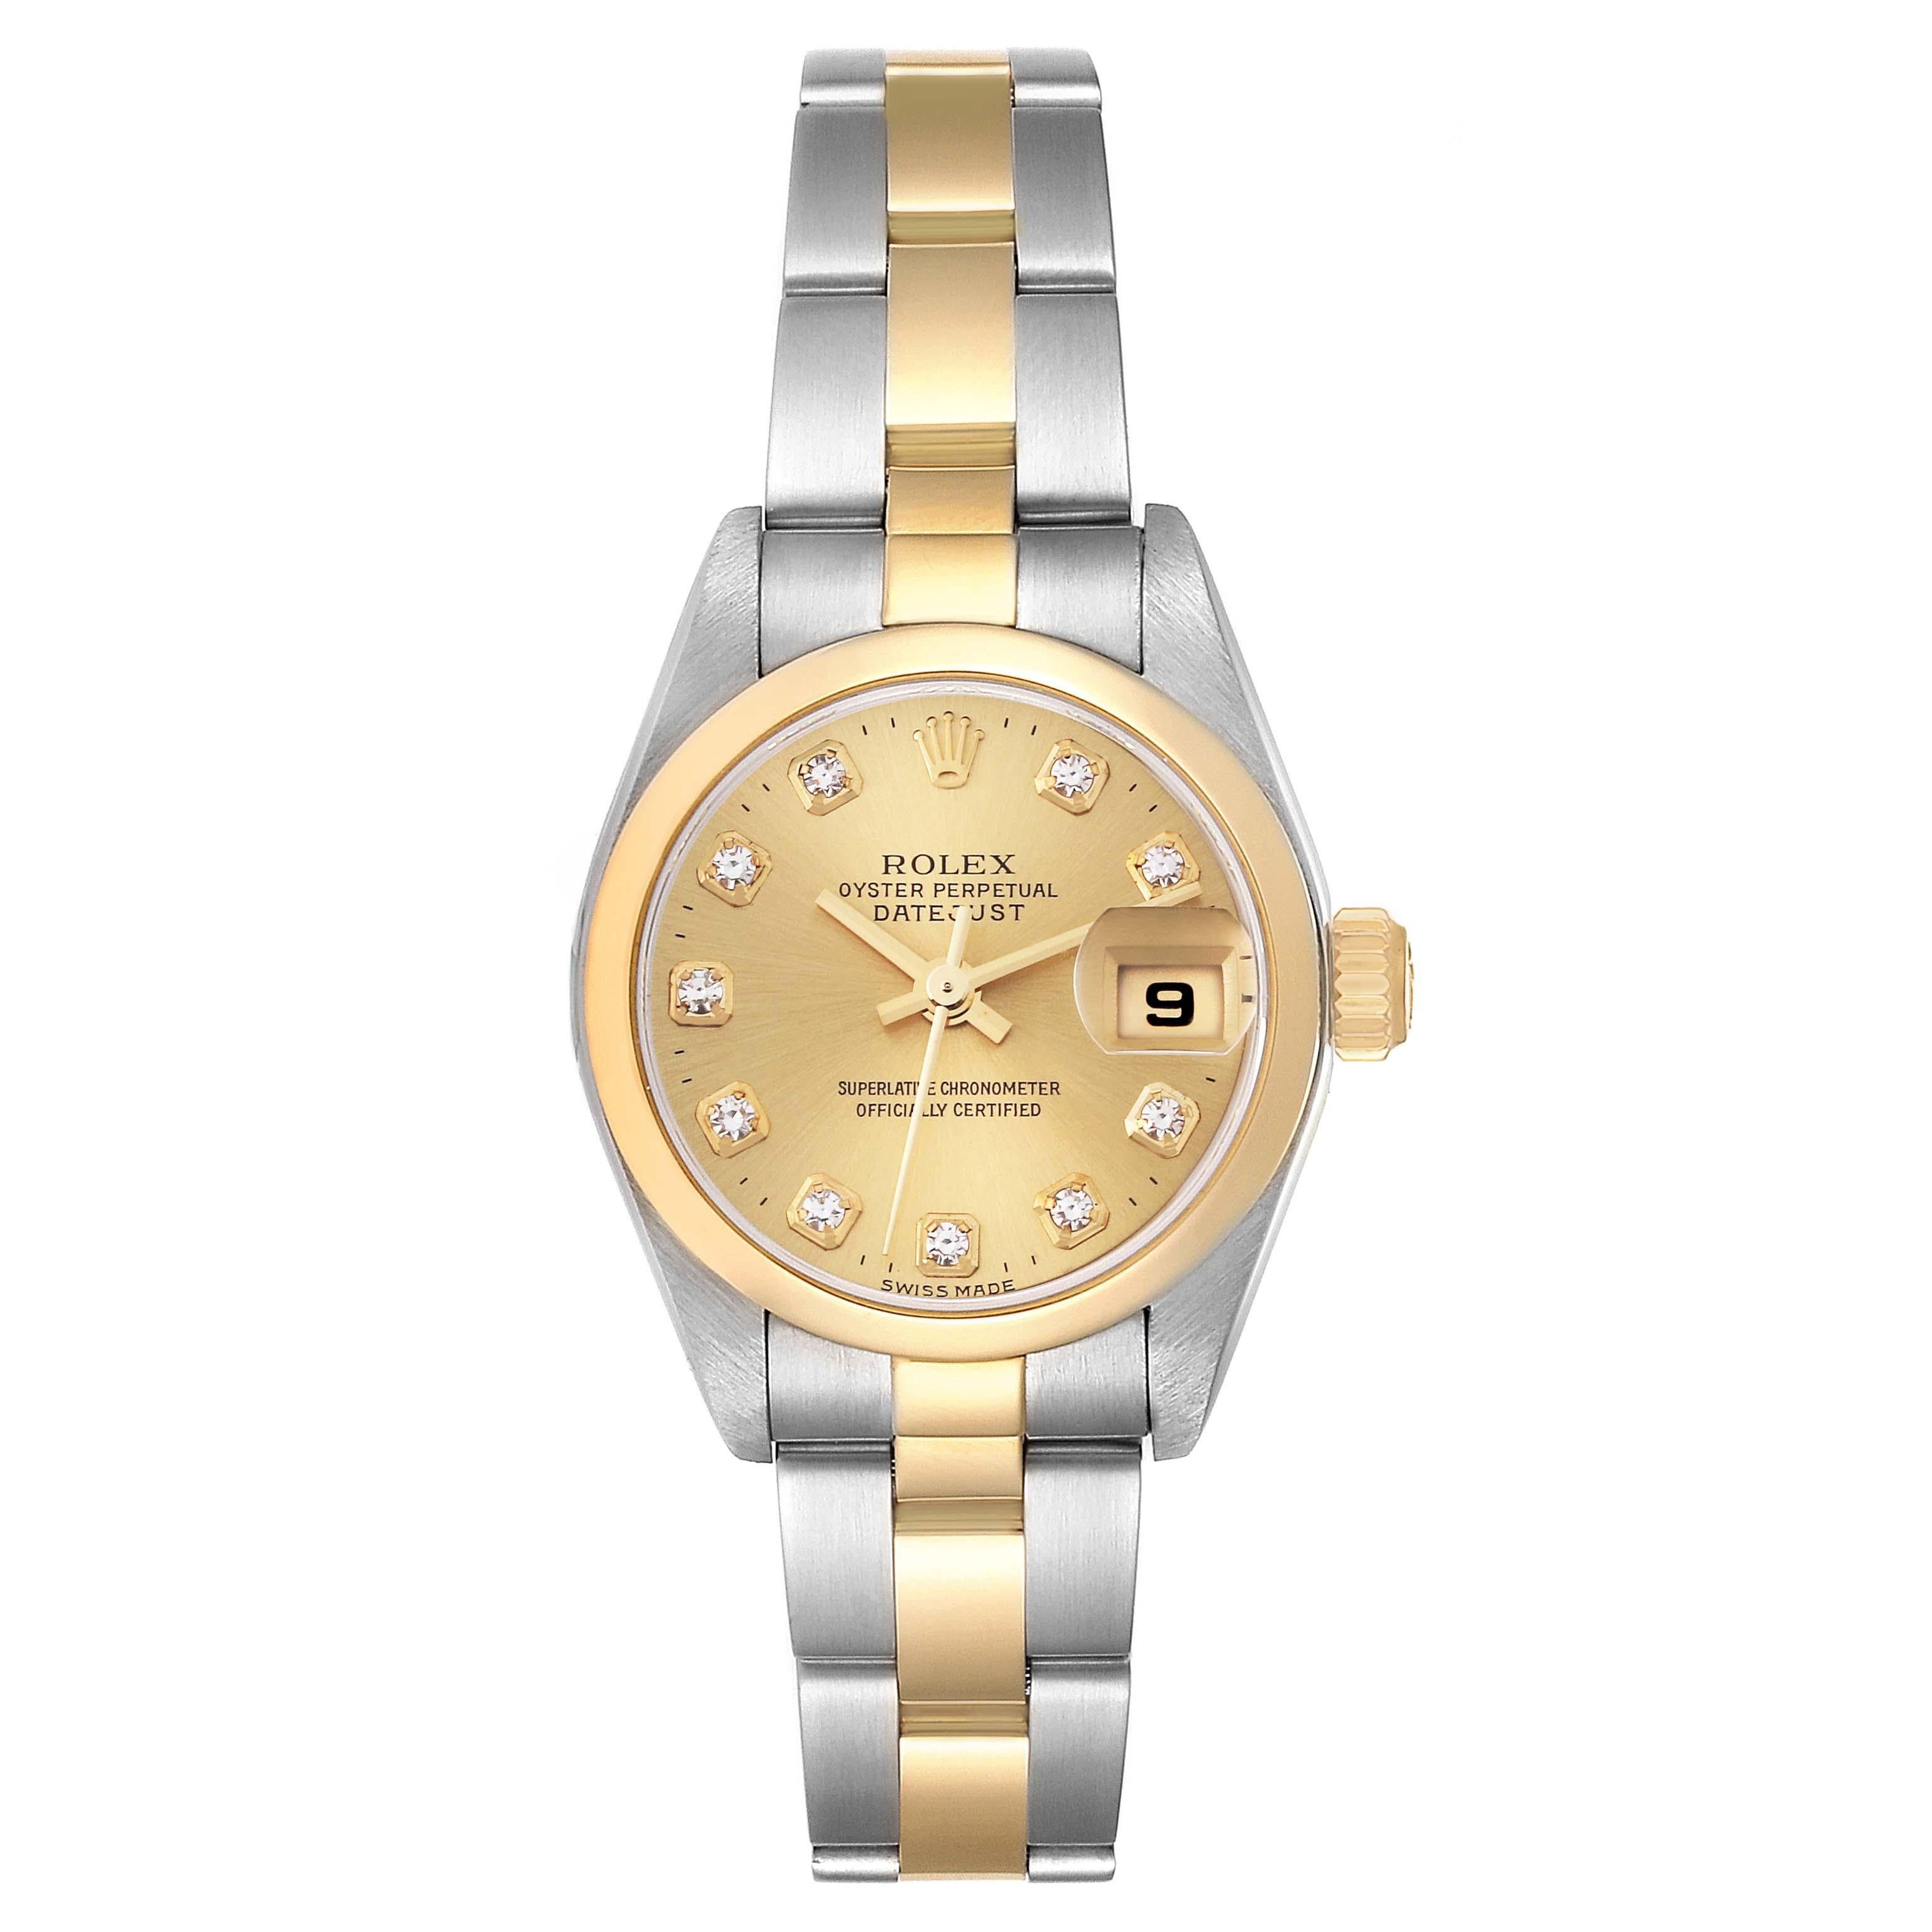 Rolex Datejust Steel Yellow Gold Diamond Dial Ladies Watch 79163 Papers. Officially certified chronometer automatic self-winding movement. Stainless steel oyster case 26 mm in diameter. Rolex logo on 18k yellow gold crown. 18k yellow gold smooth